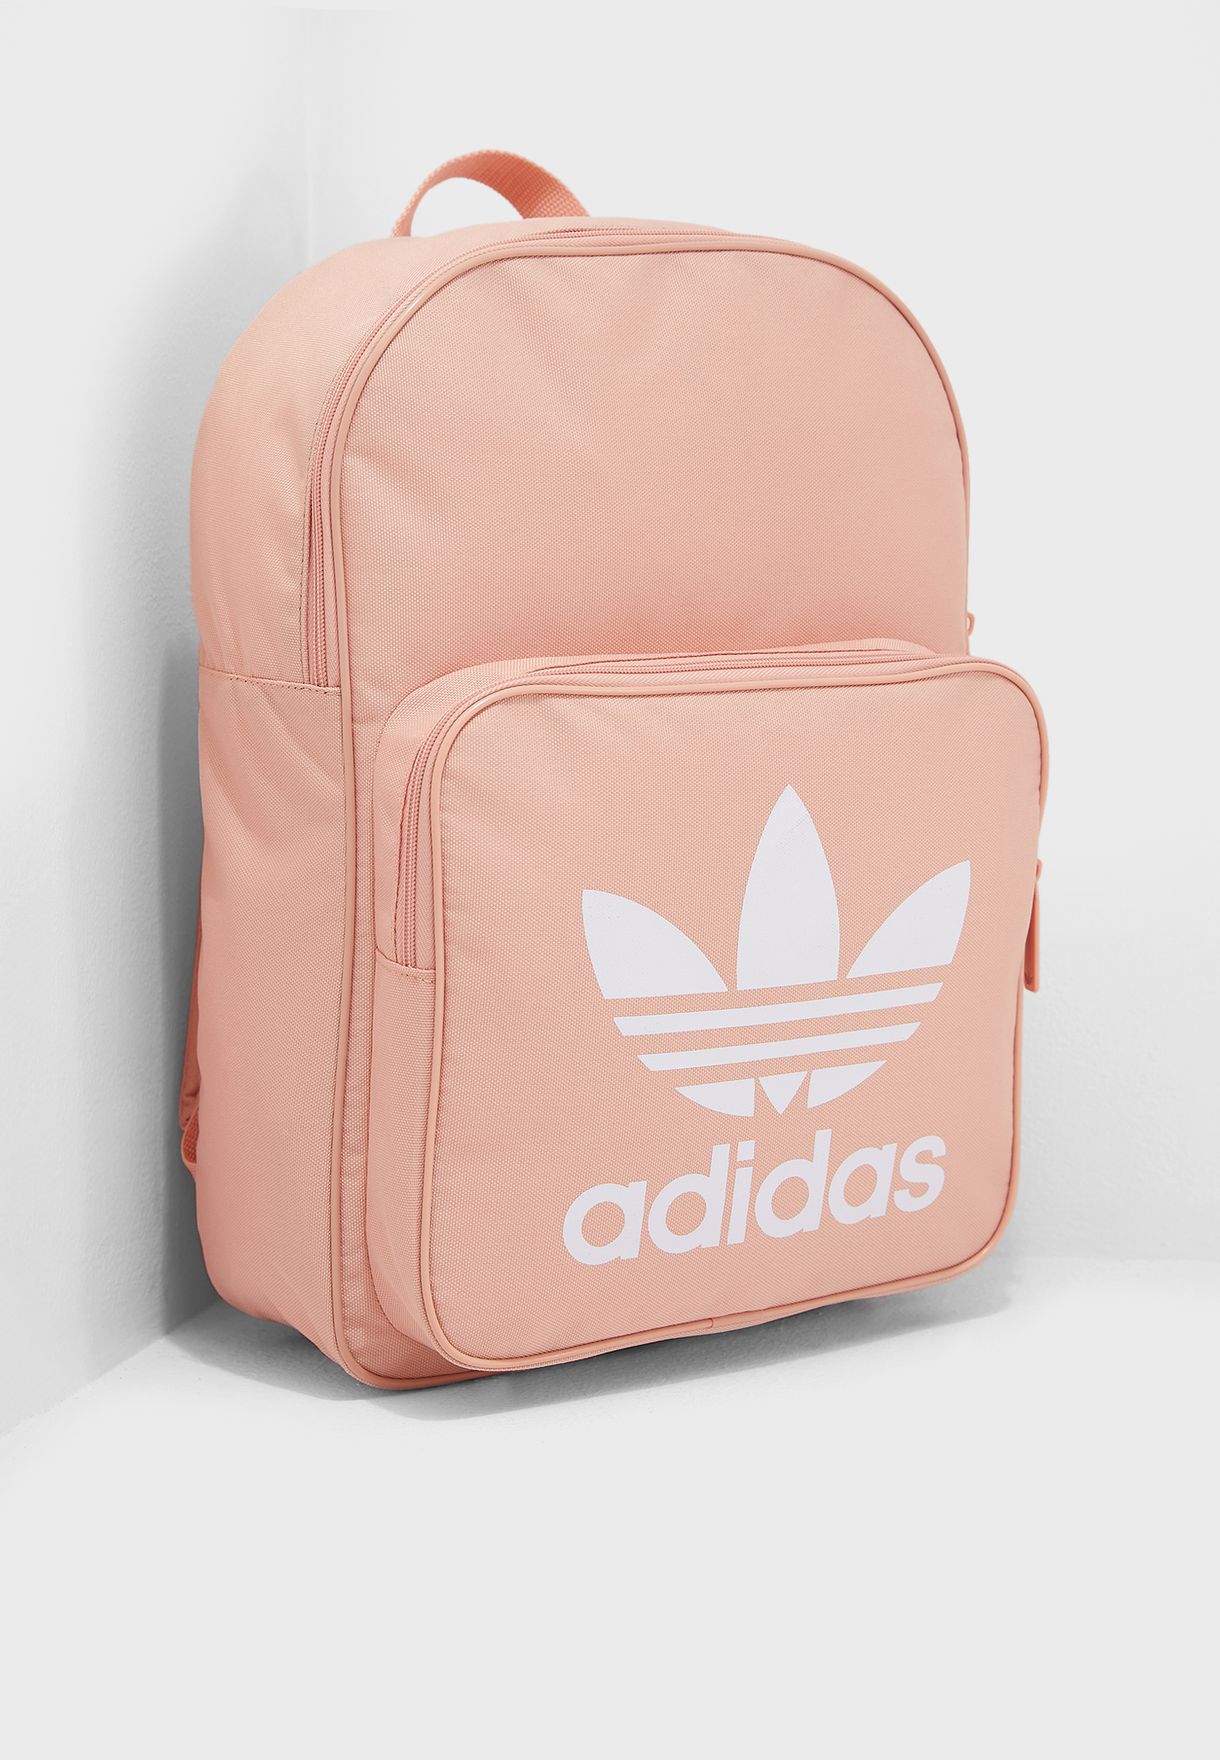 adidas classic pink backpack